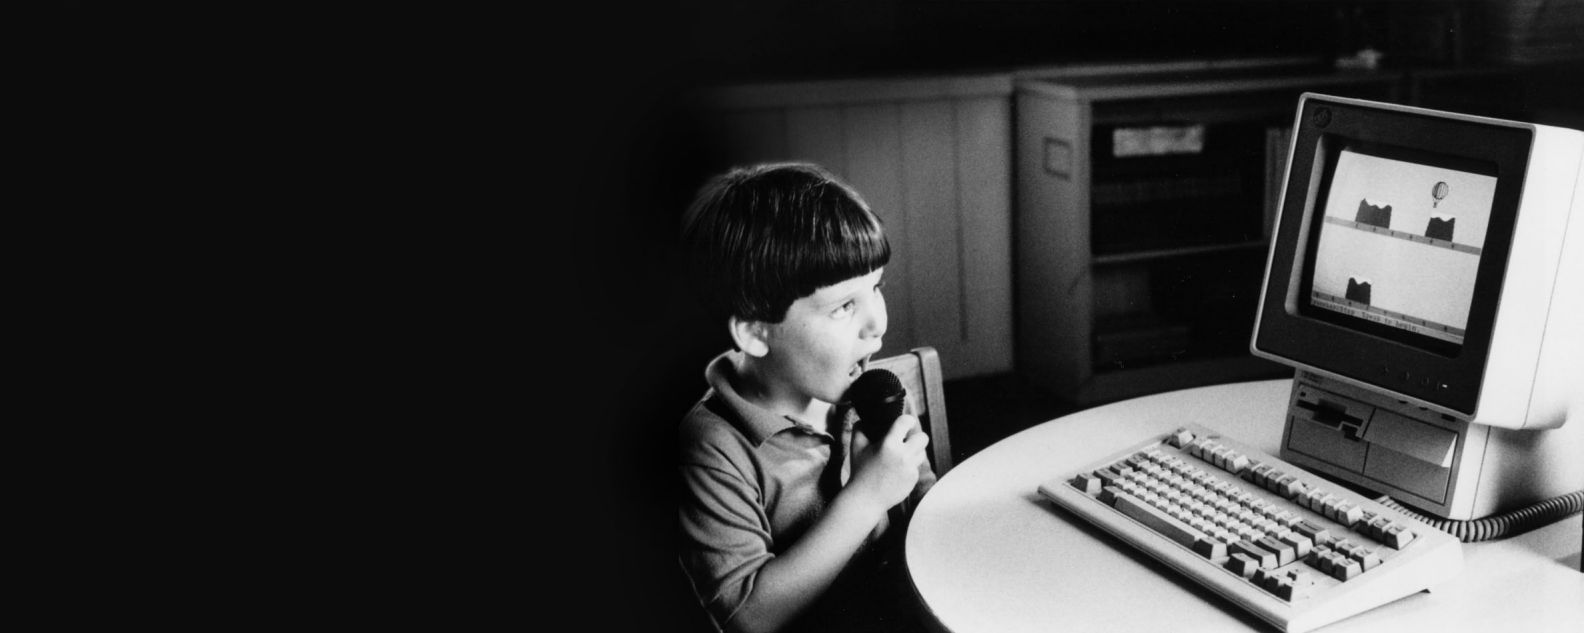 A child speaks into a microphone attached to the PS/2 computer